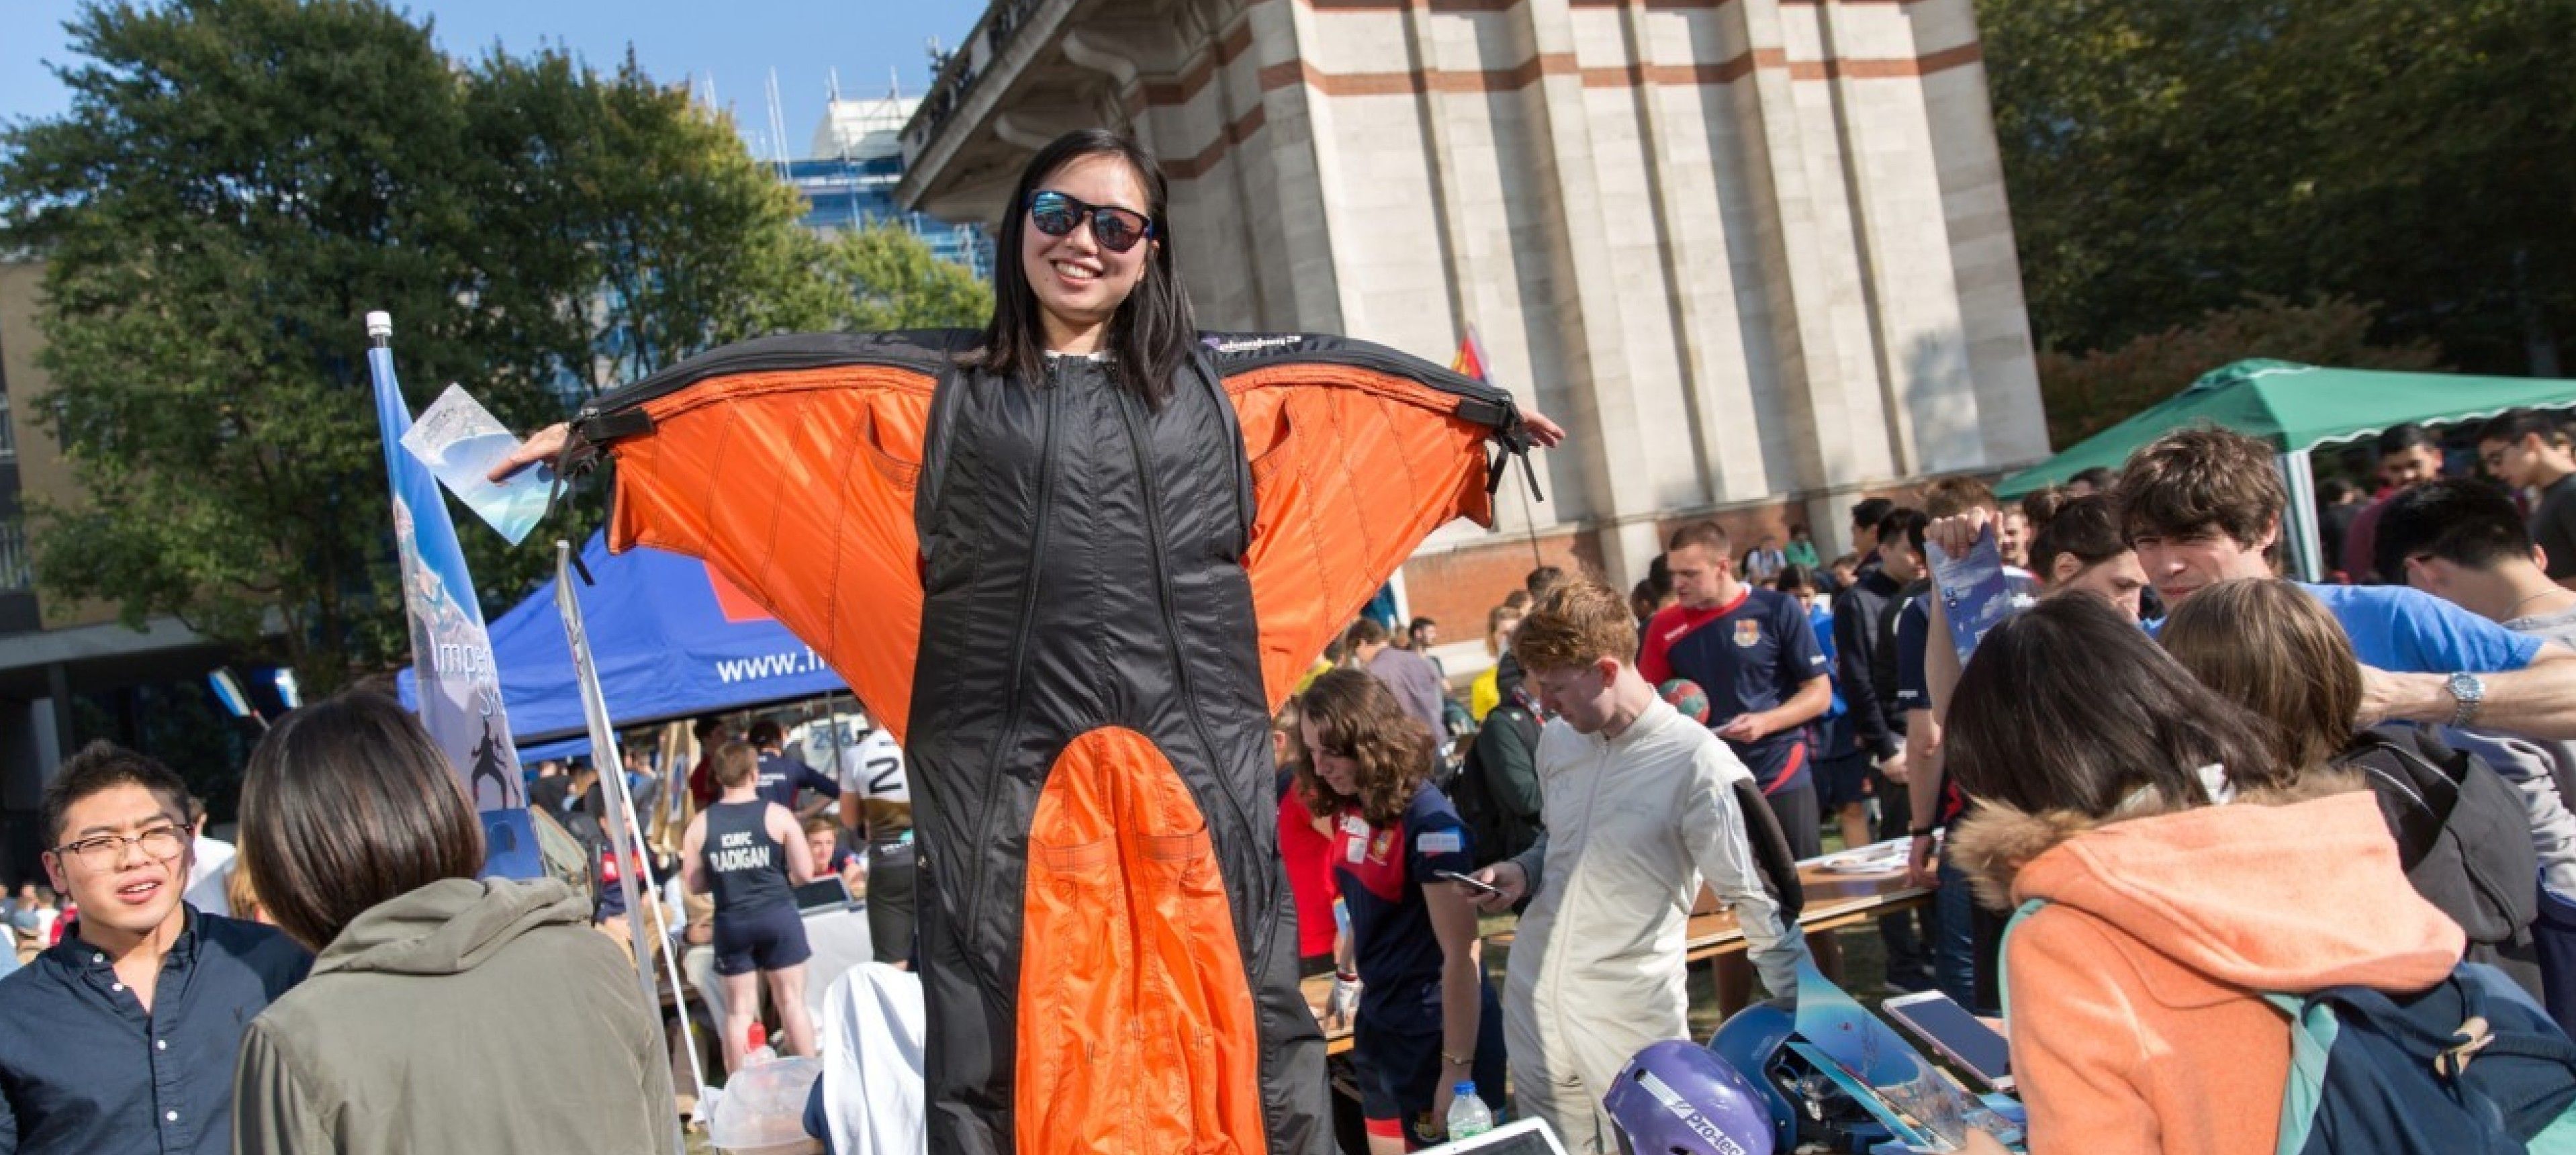 A student from Imperial's skydiving club demonstrating her winged skydiving suit at Imperial's Freshers' Fair